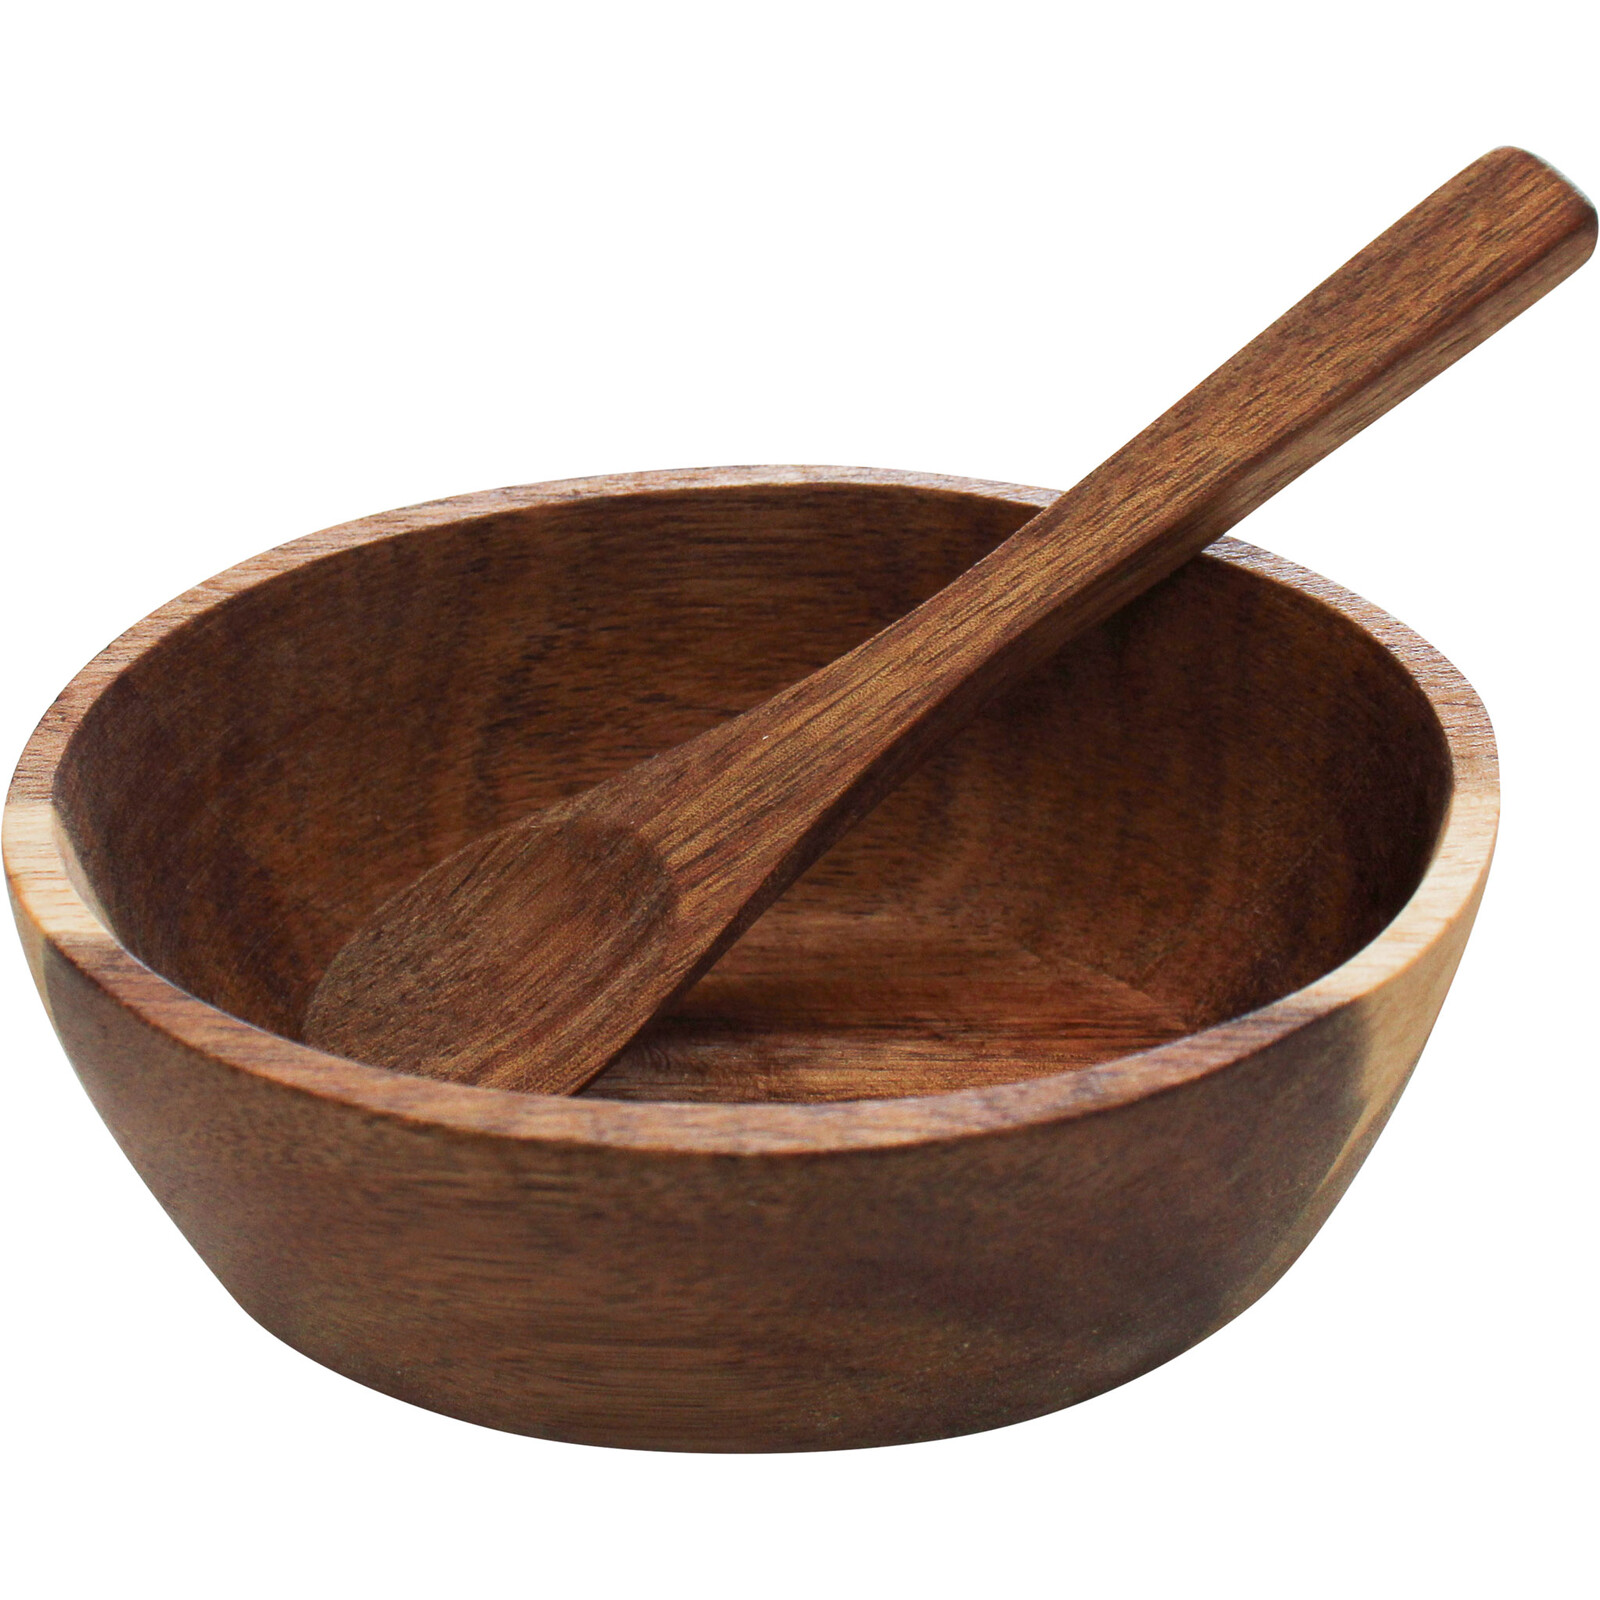 Acacia Oval Bowl with Spoon